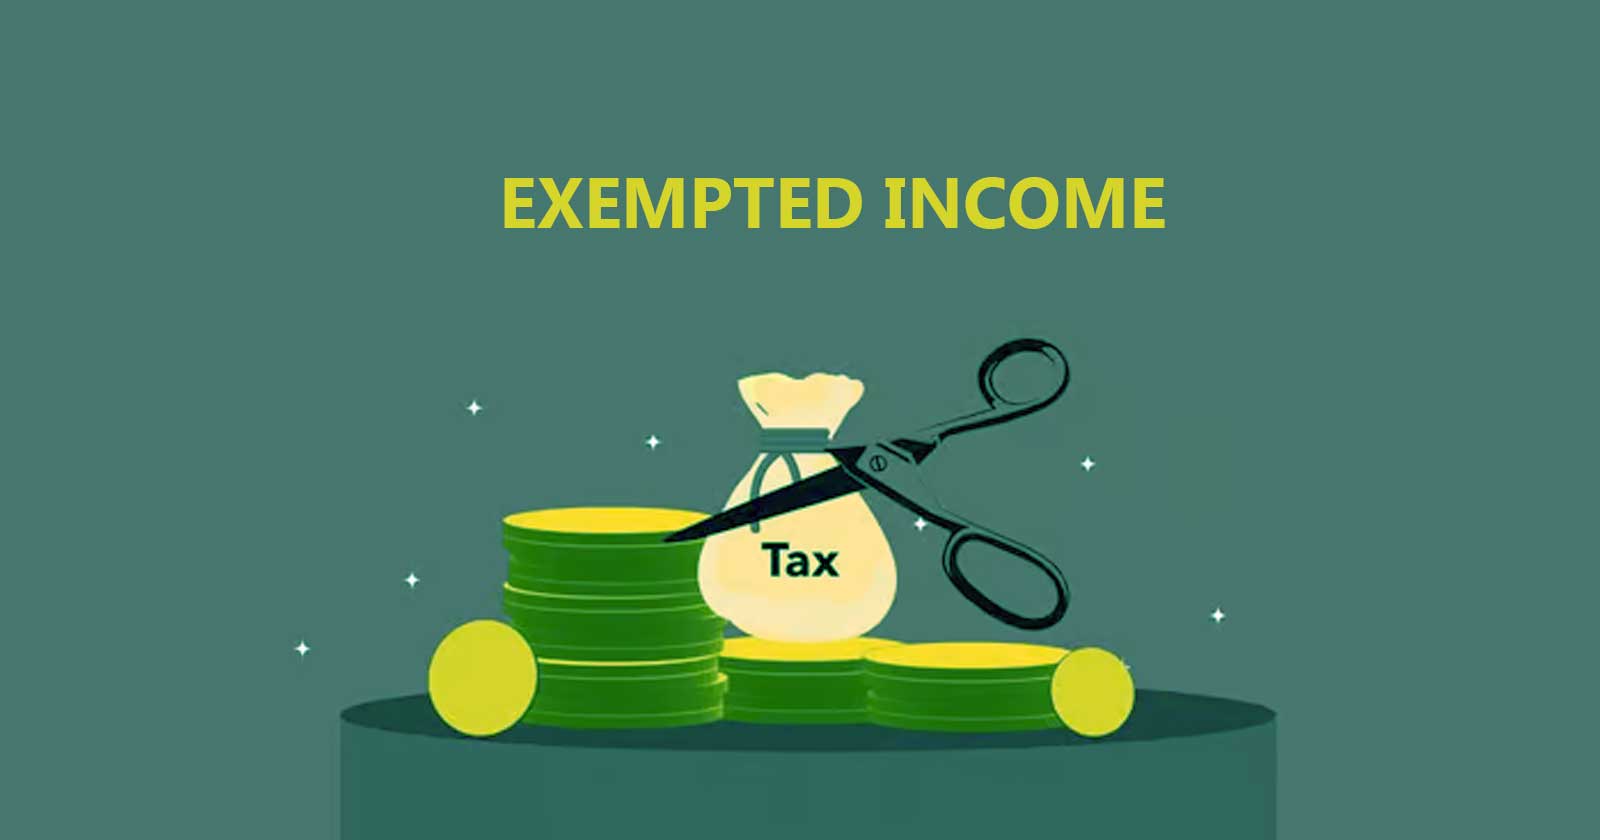 ITAT Mumbai - Income Tax Act - Income Tax - ITAT ruling on income tax exemption - Ignorance in income tax filing - Taxscan